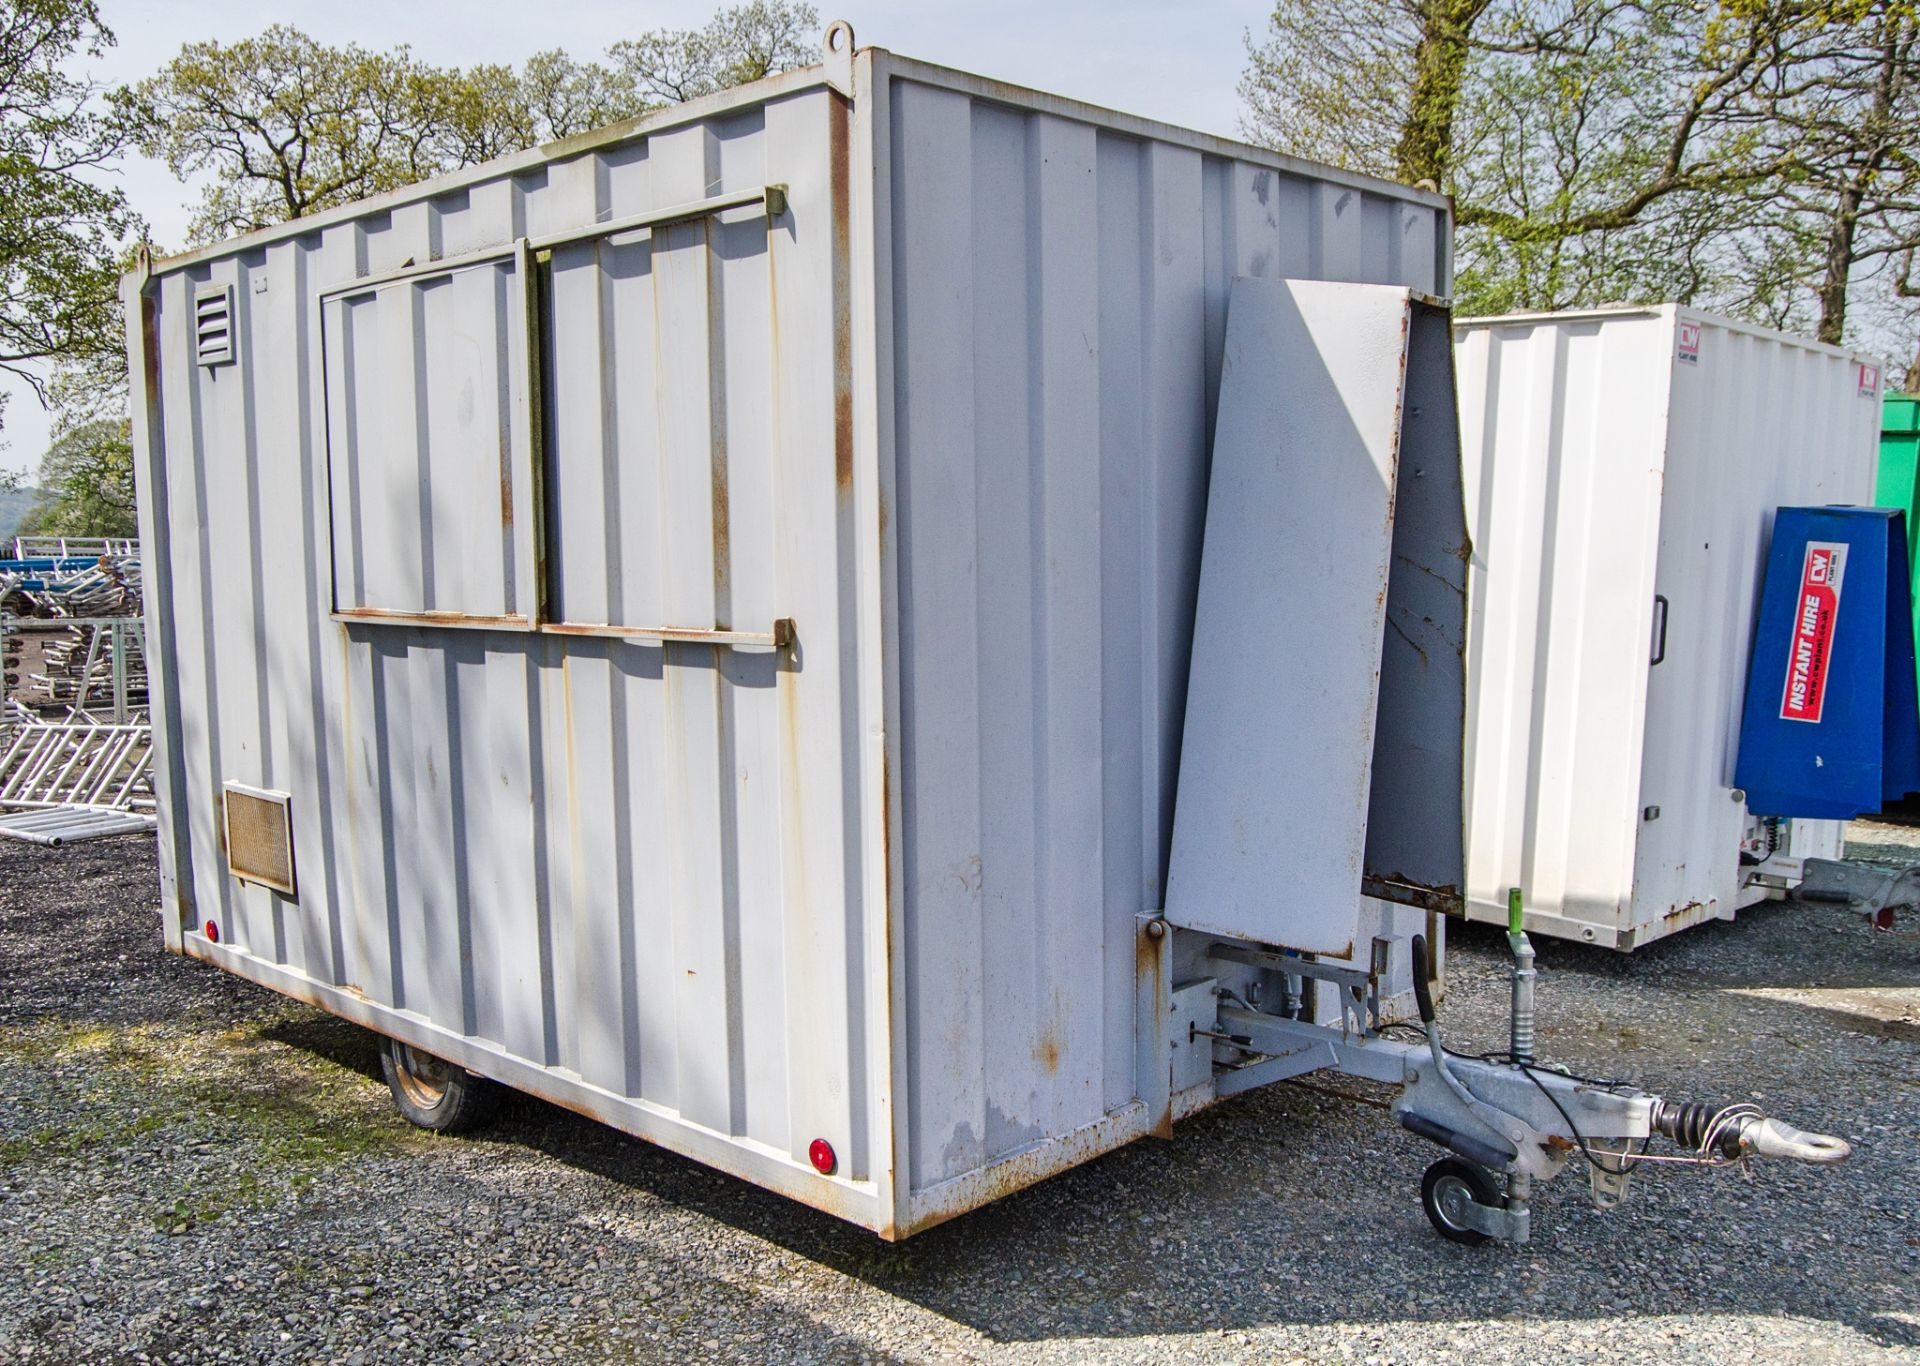 Groundhog 12ft x 8ft steel anti-vandal mobile welfare site unit Comprising of: canteen area, - Image 2 of 12